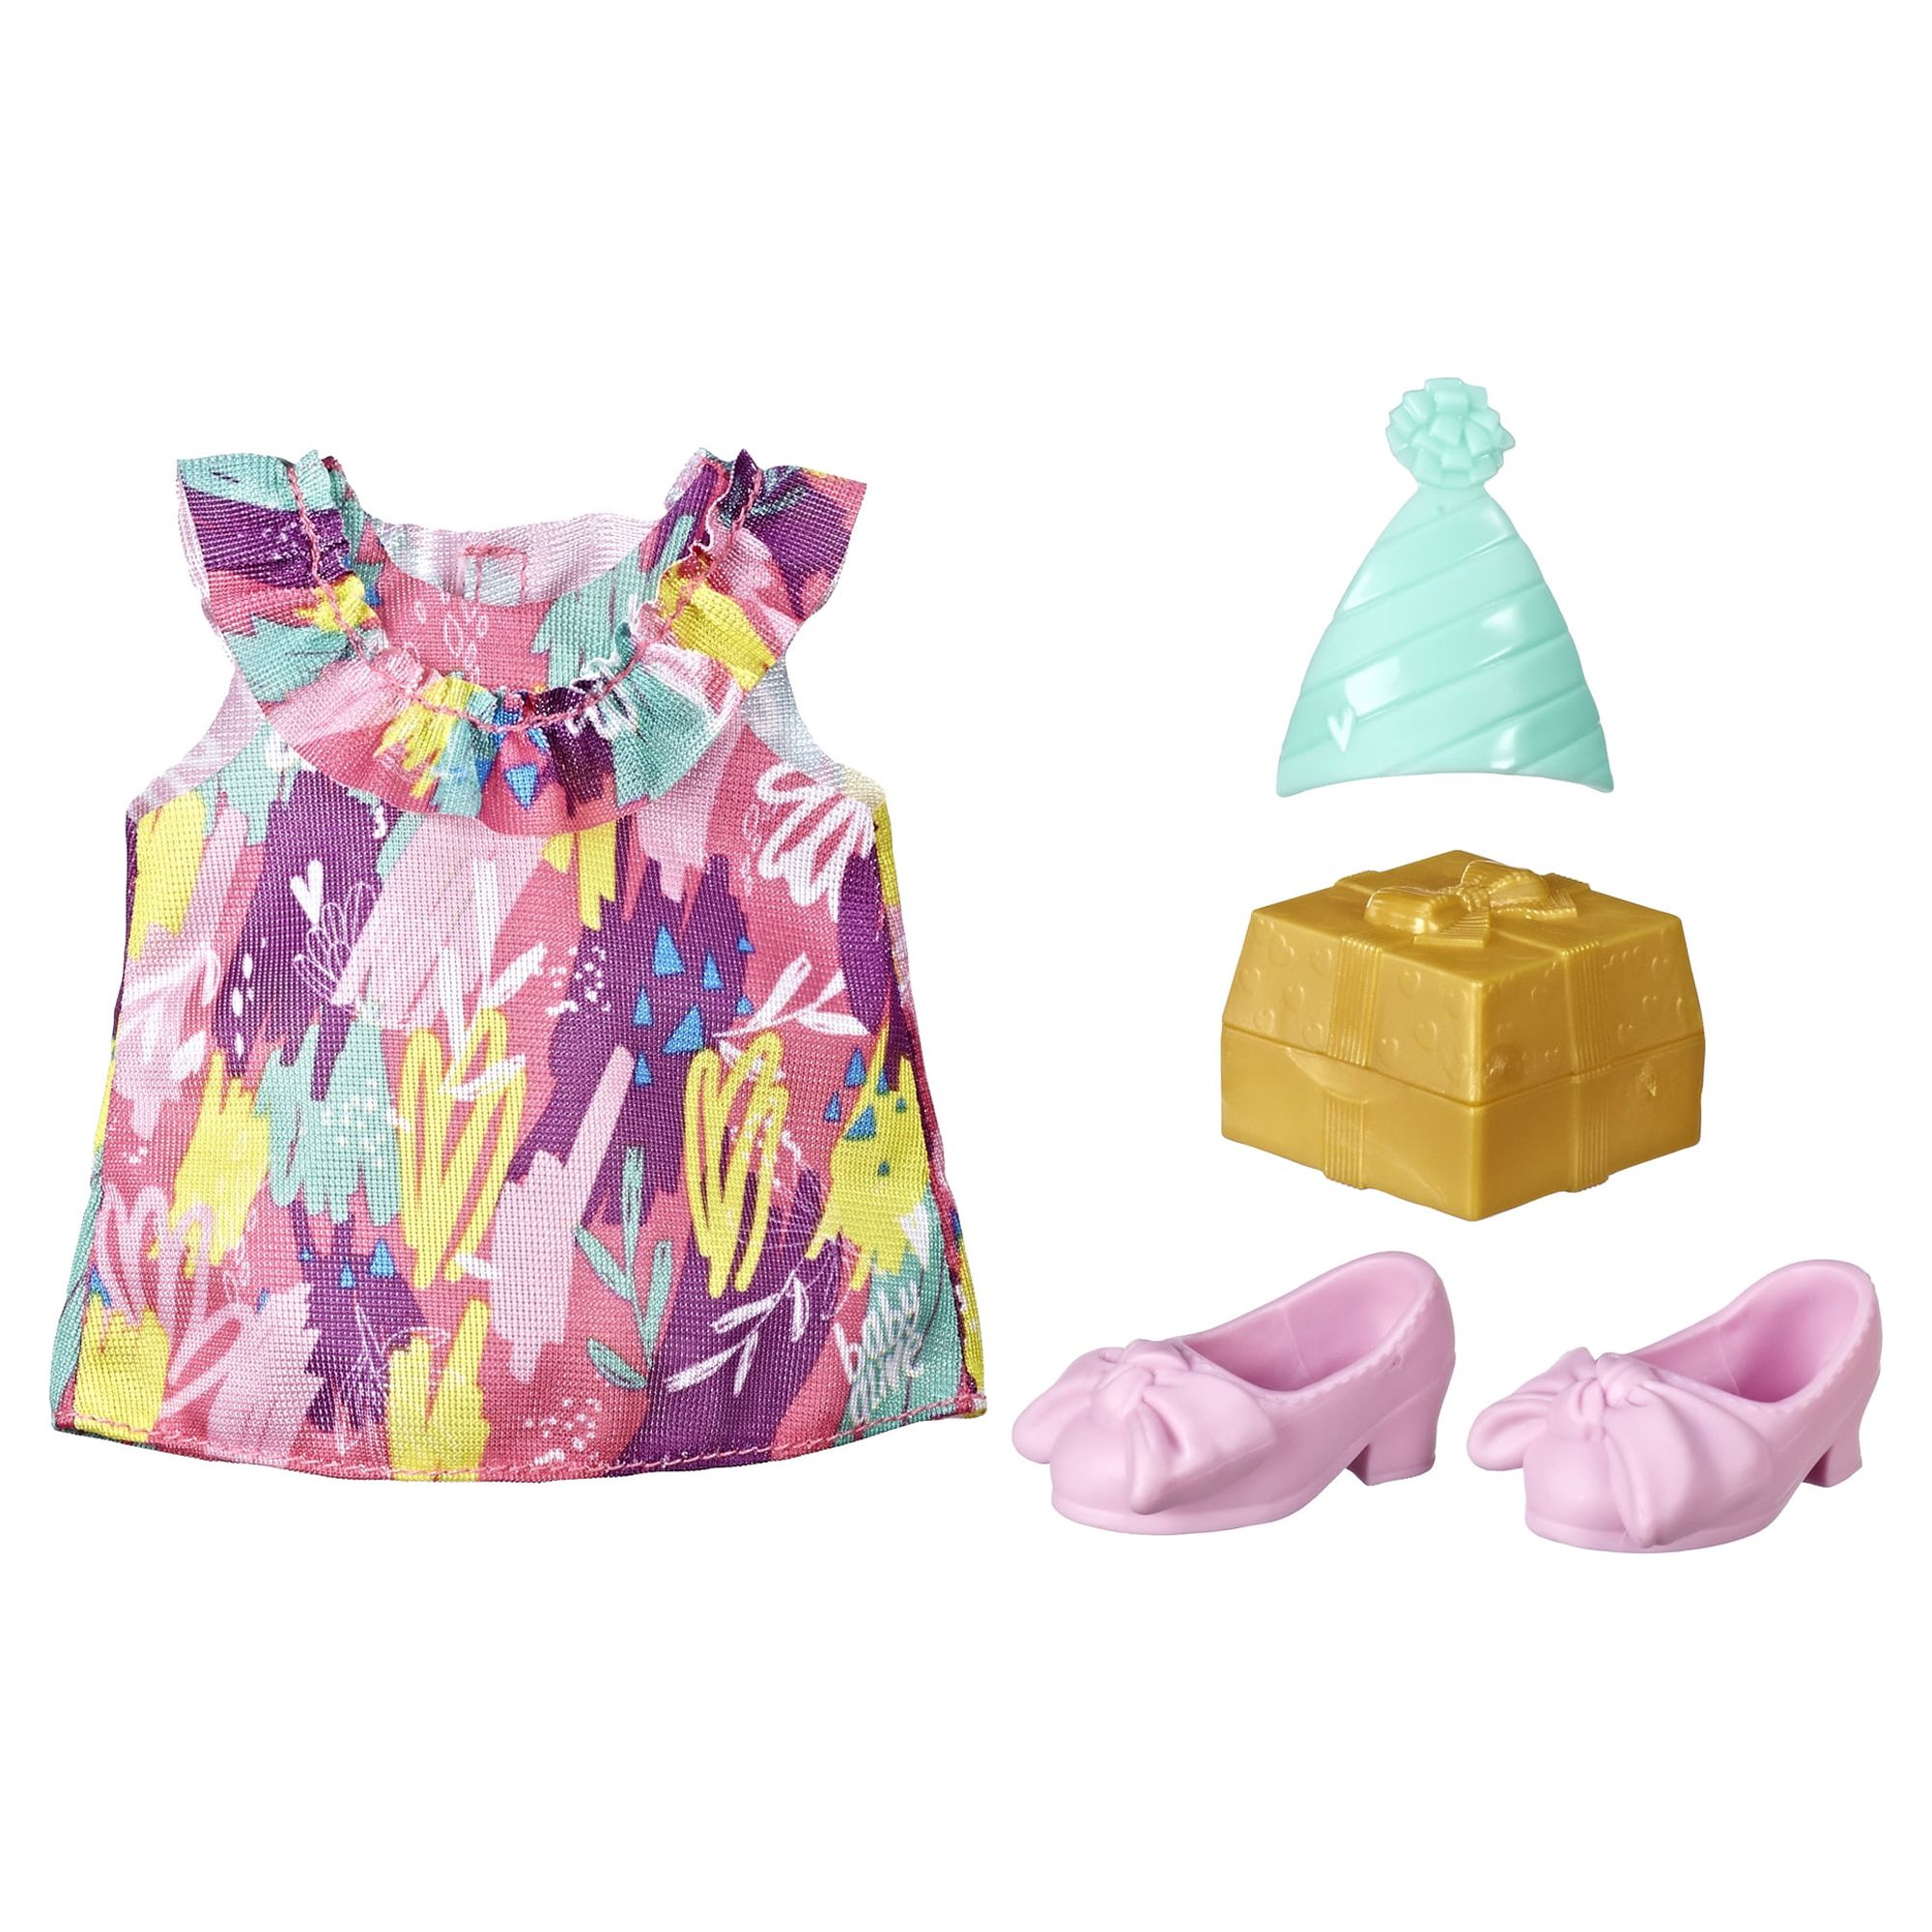 Baby Alive Little Styles Birthday Party Outfit for Littles Doll Clothing - image 1 of 7